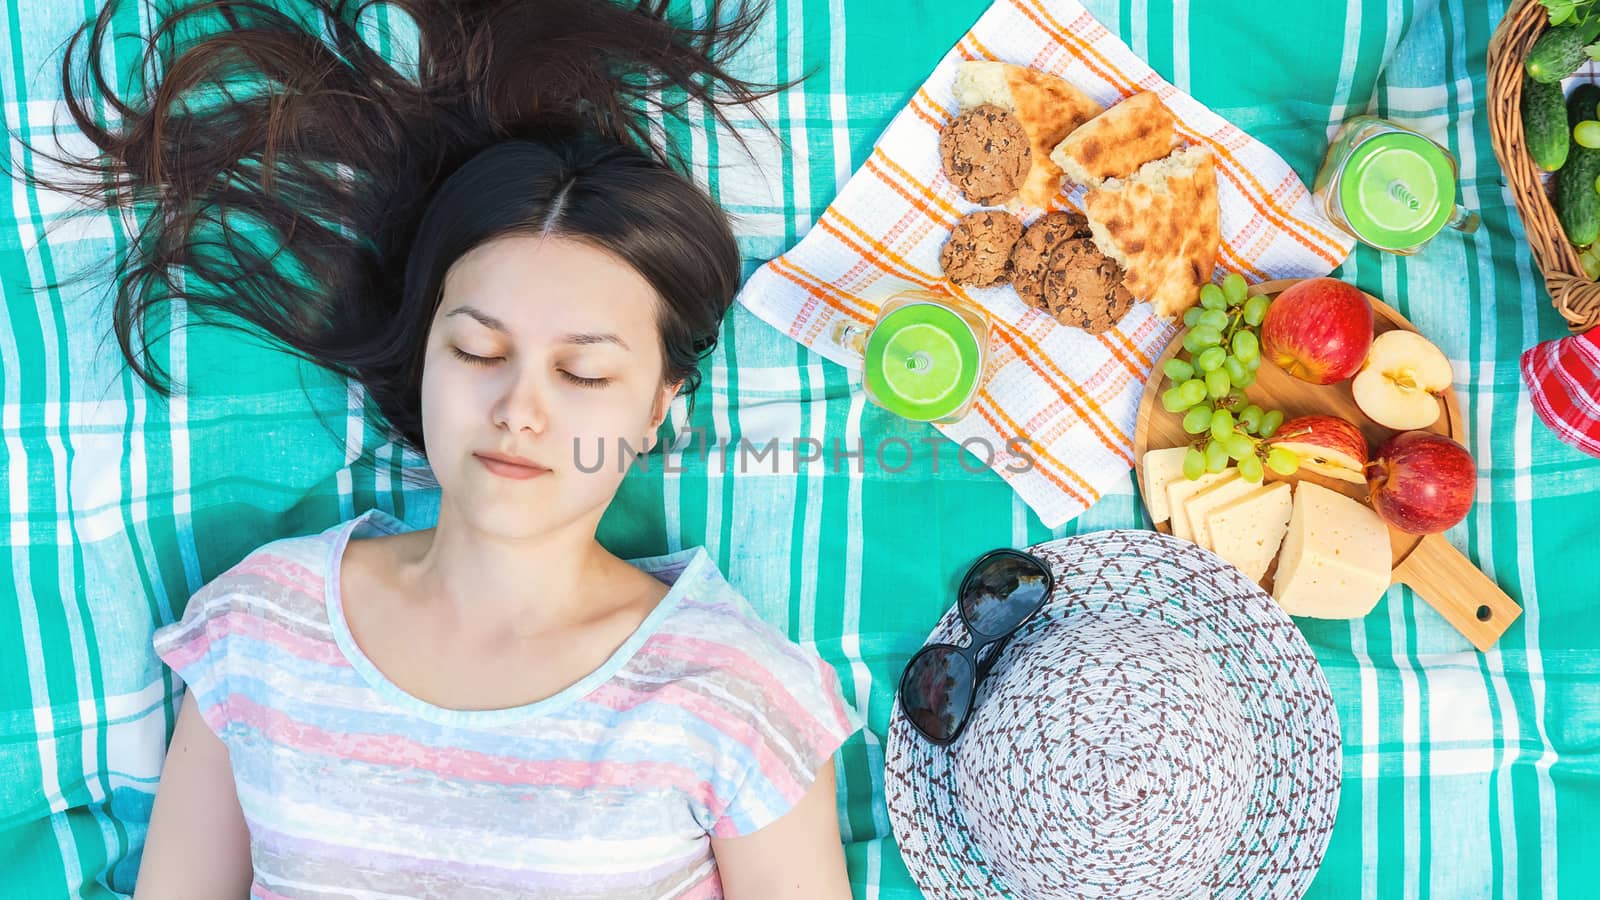 Young girl with long dark hair is lying on a plaid on a picnic on a summer day - summer holidays and vacation concept.